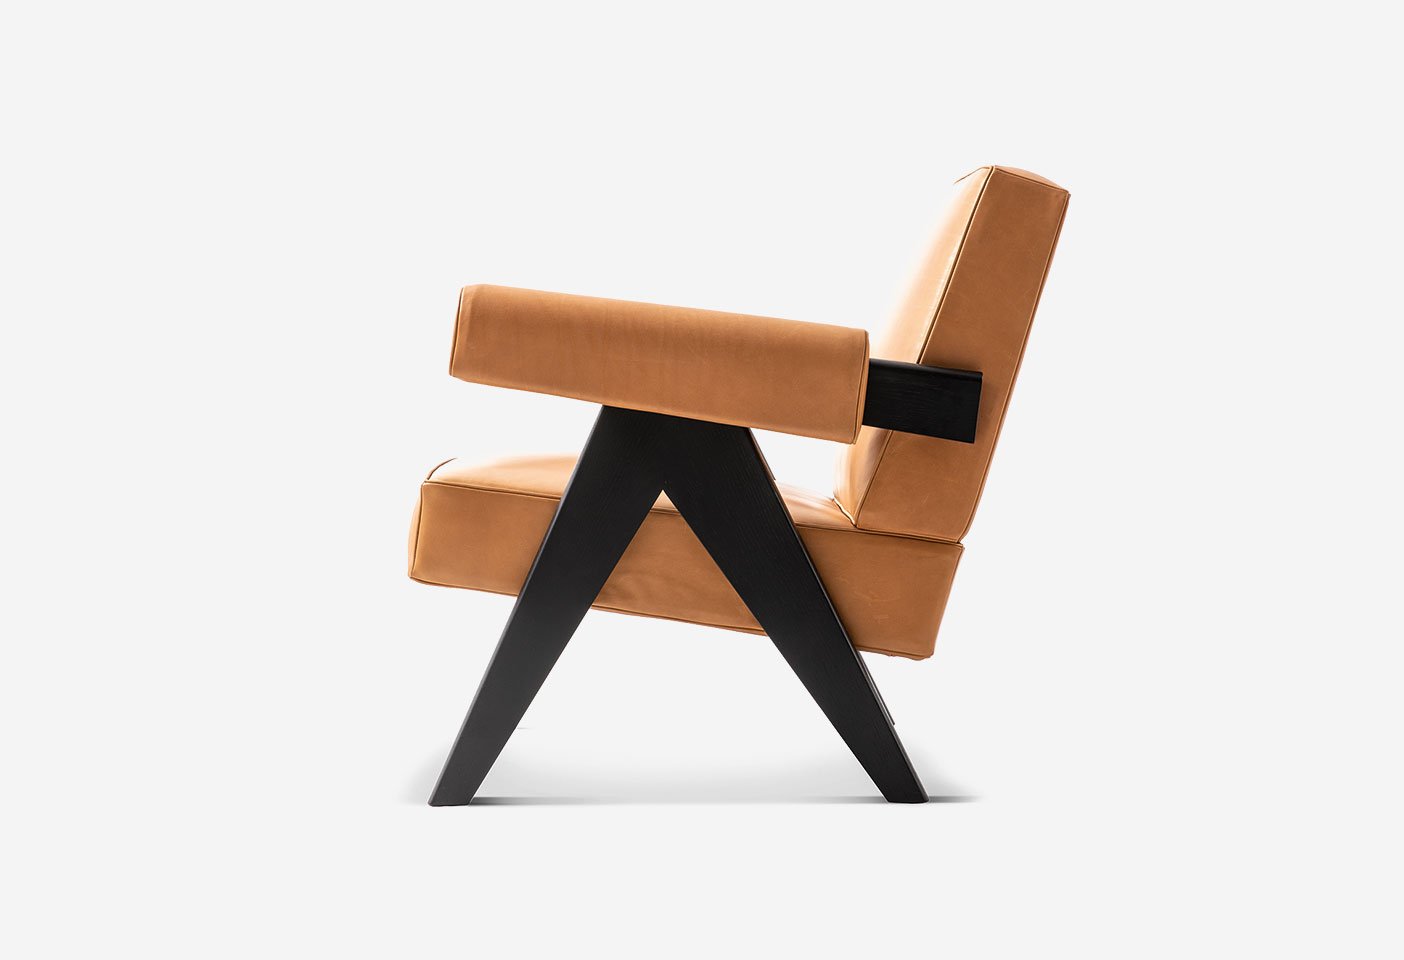 Capitol Complex Armchair designed by Pierre Jeanneret produced by Cassina. Photo c/o Cassina.